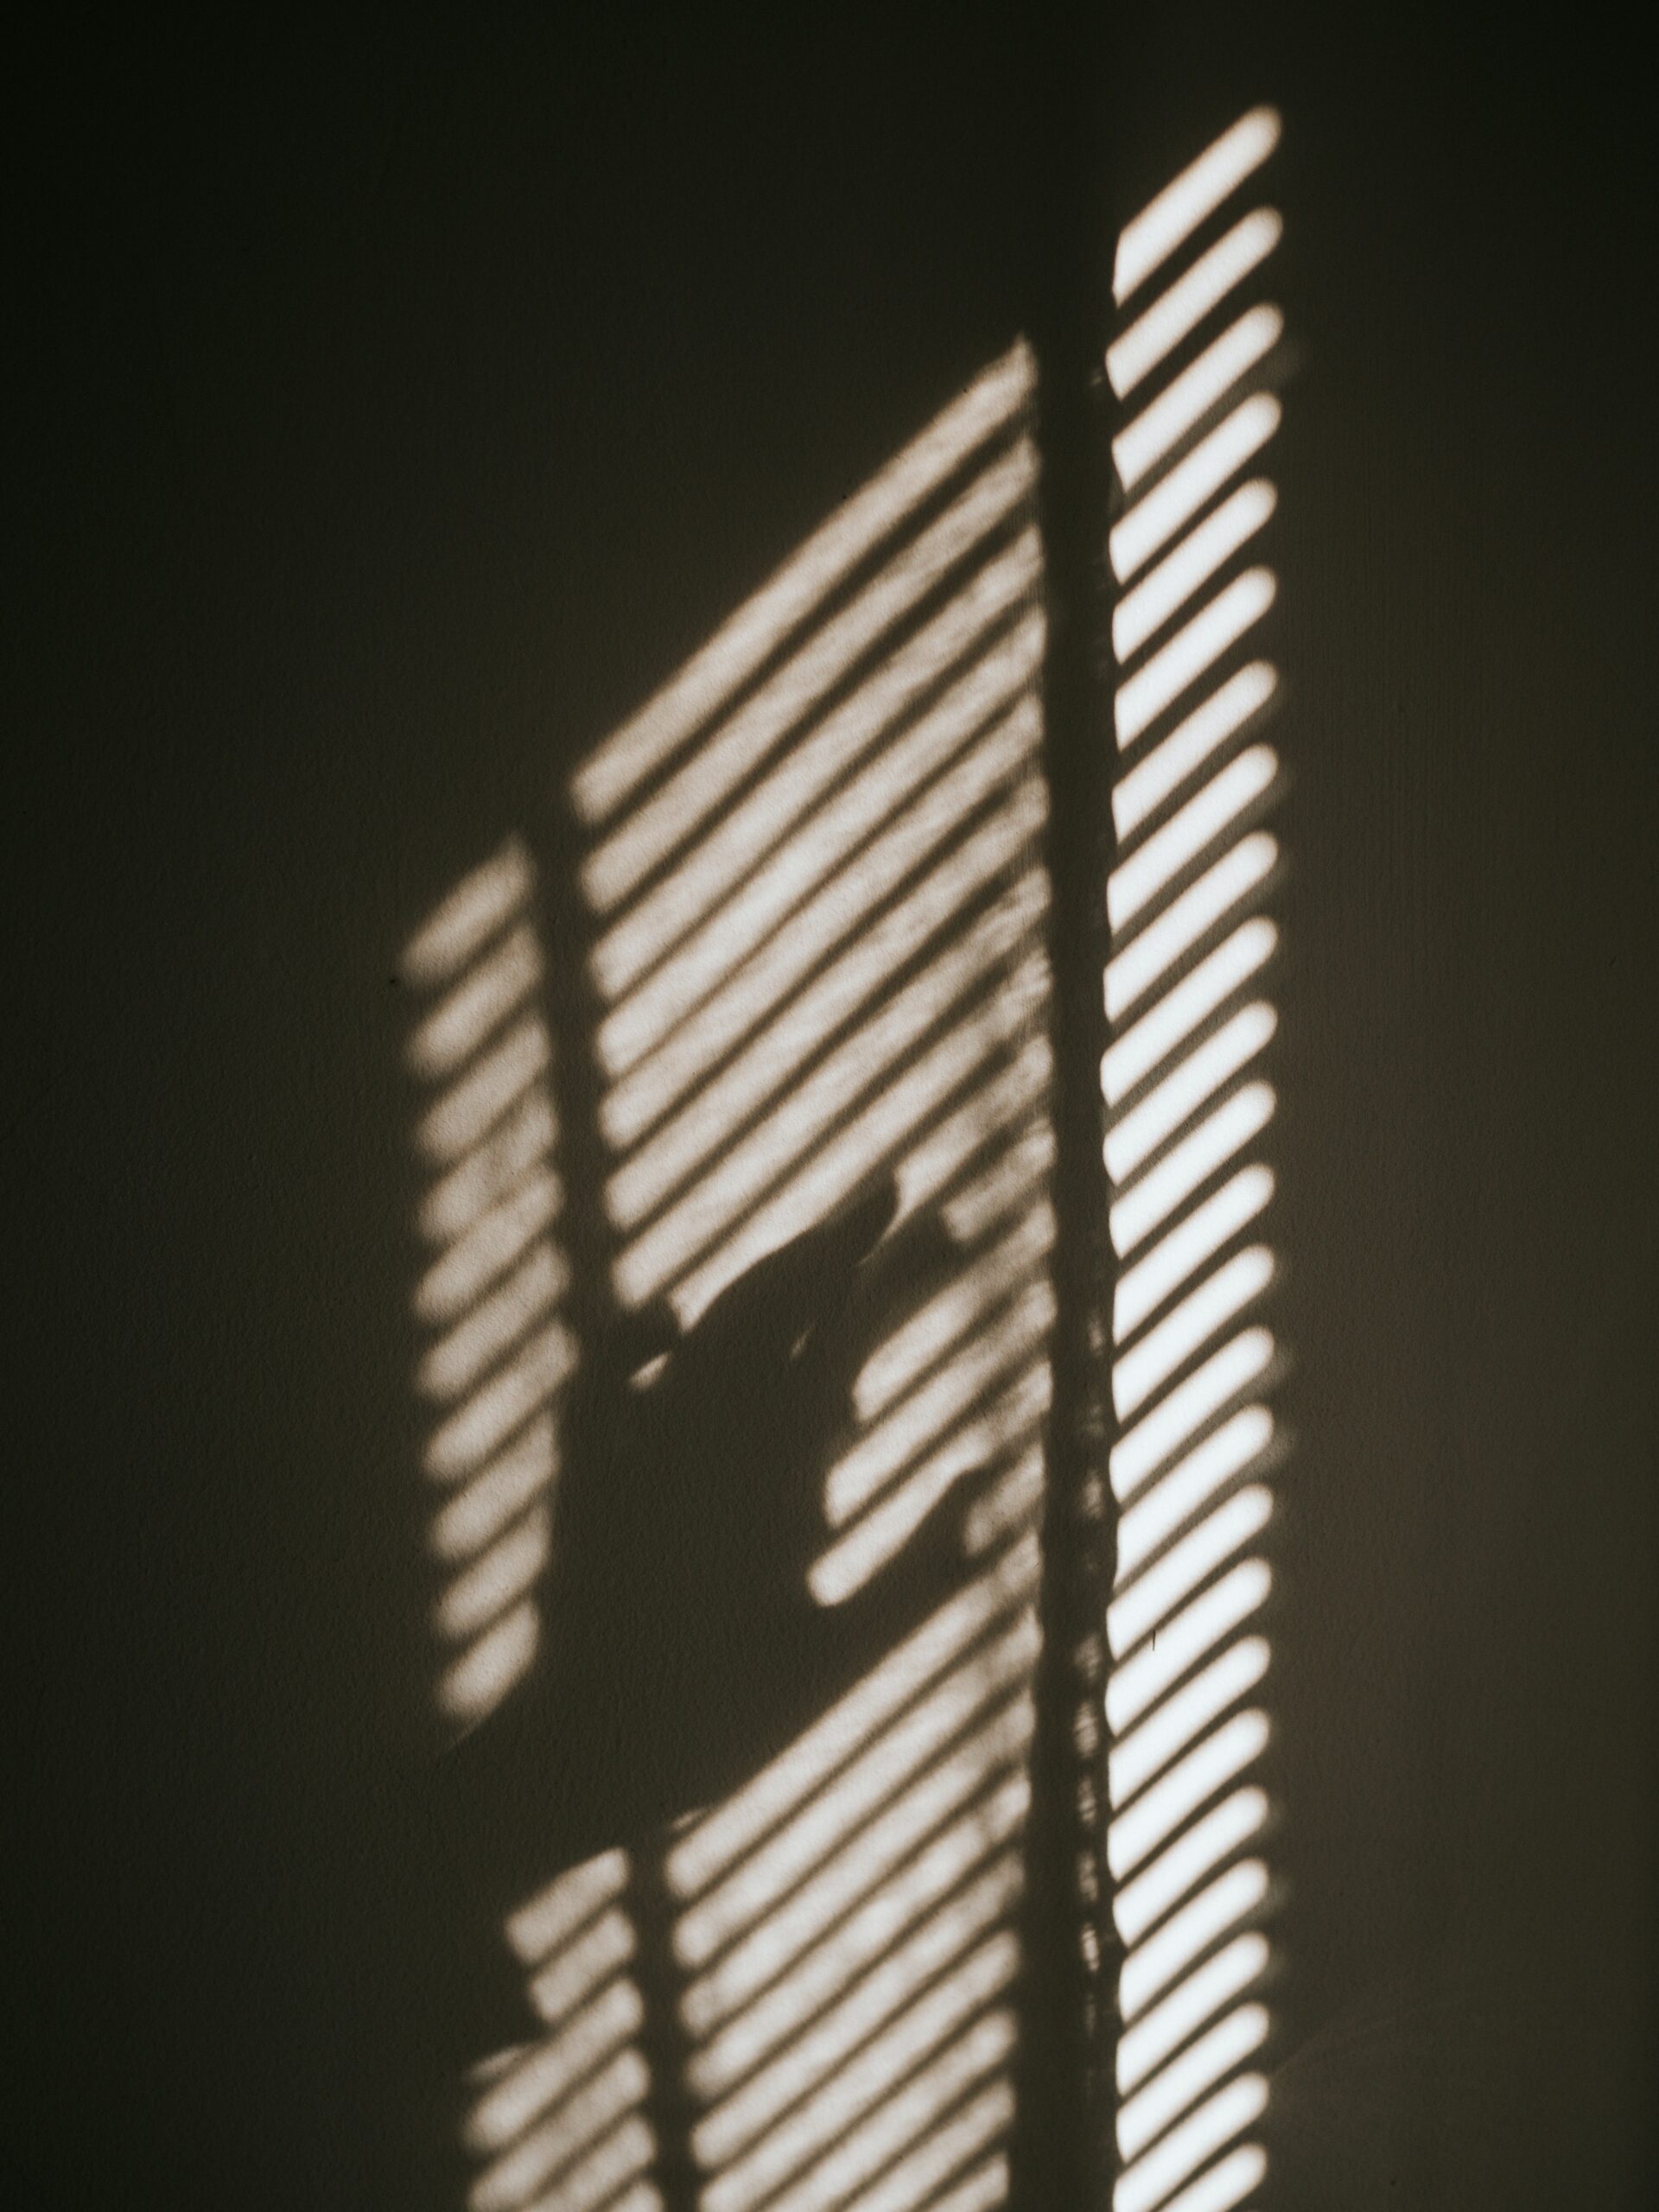 Photo by Lisa Fotios: https://www.pexels.com/photo/hand-over-blinds-on-window-14090314/